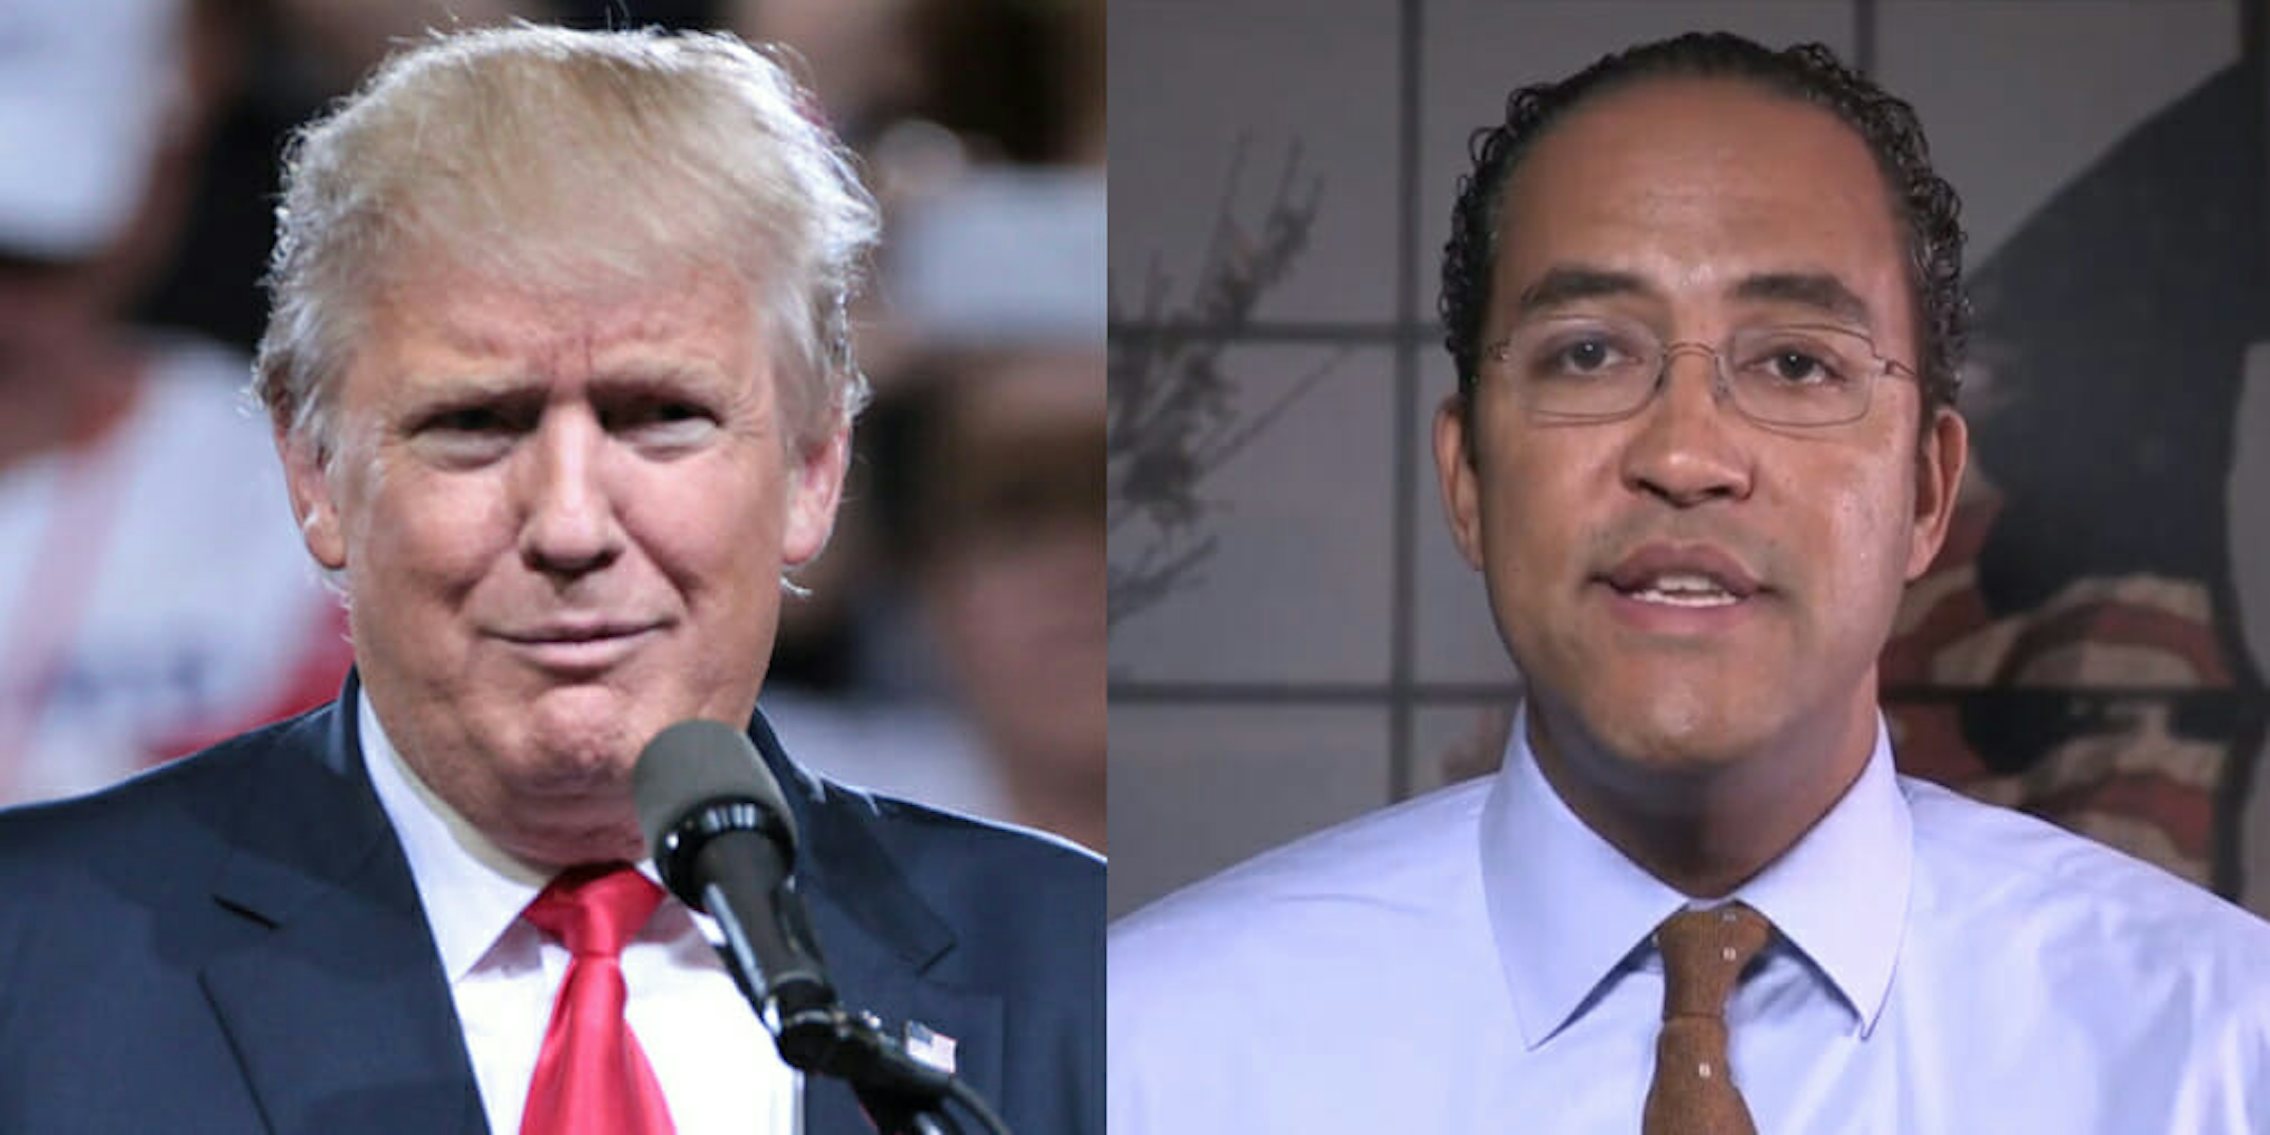 Rep. Will Hurd (R-Tx.) slammed President Donald Trump's remarks during a press conference with Vladimir Putin earlier this week in a New York Times op-ed.